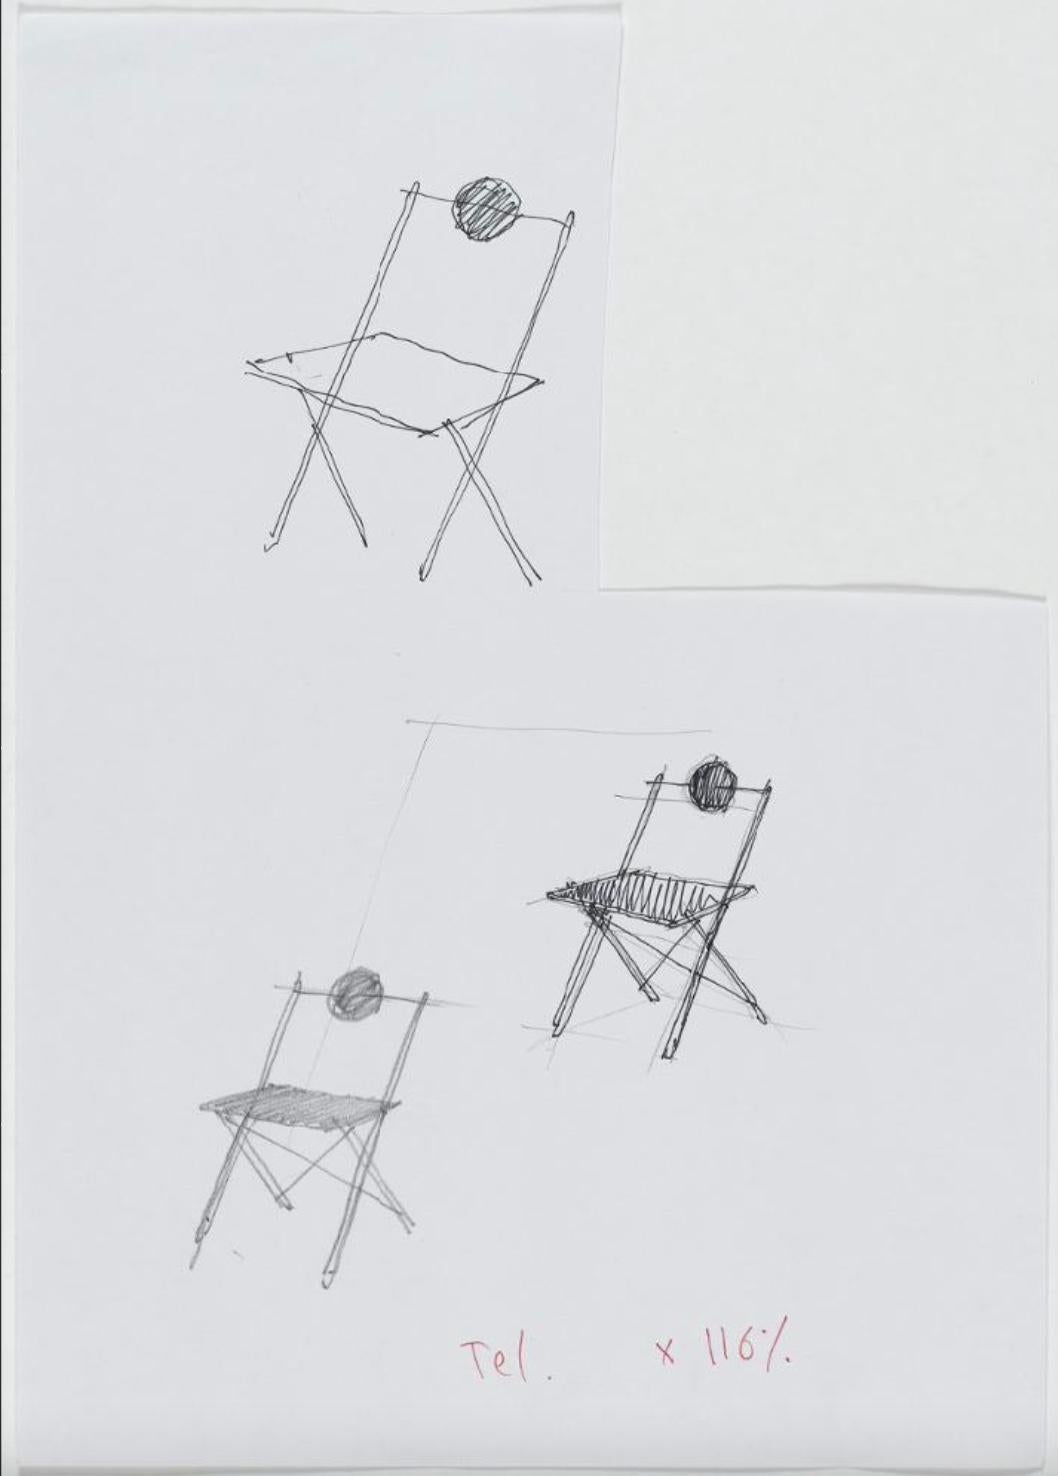 Rene-Jean Caillette, RJC folding and reversible chair VIA ed., 1986 For Sale 3